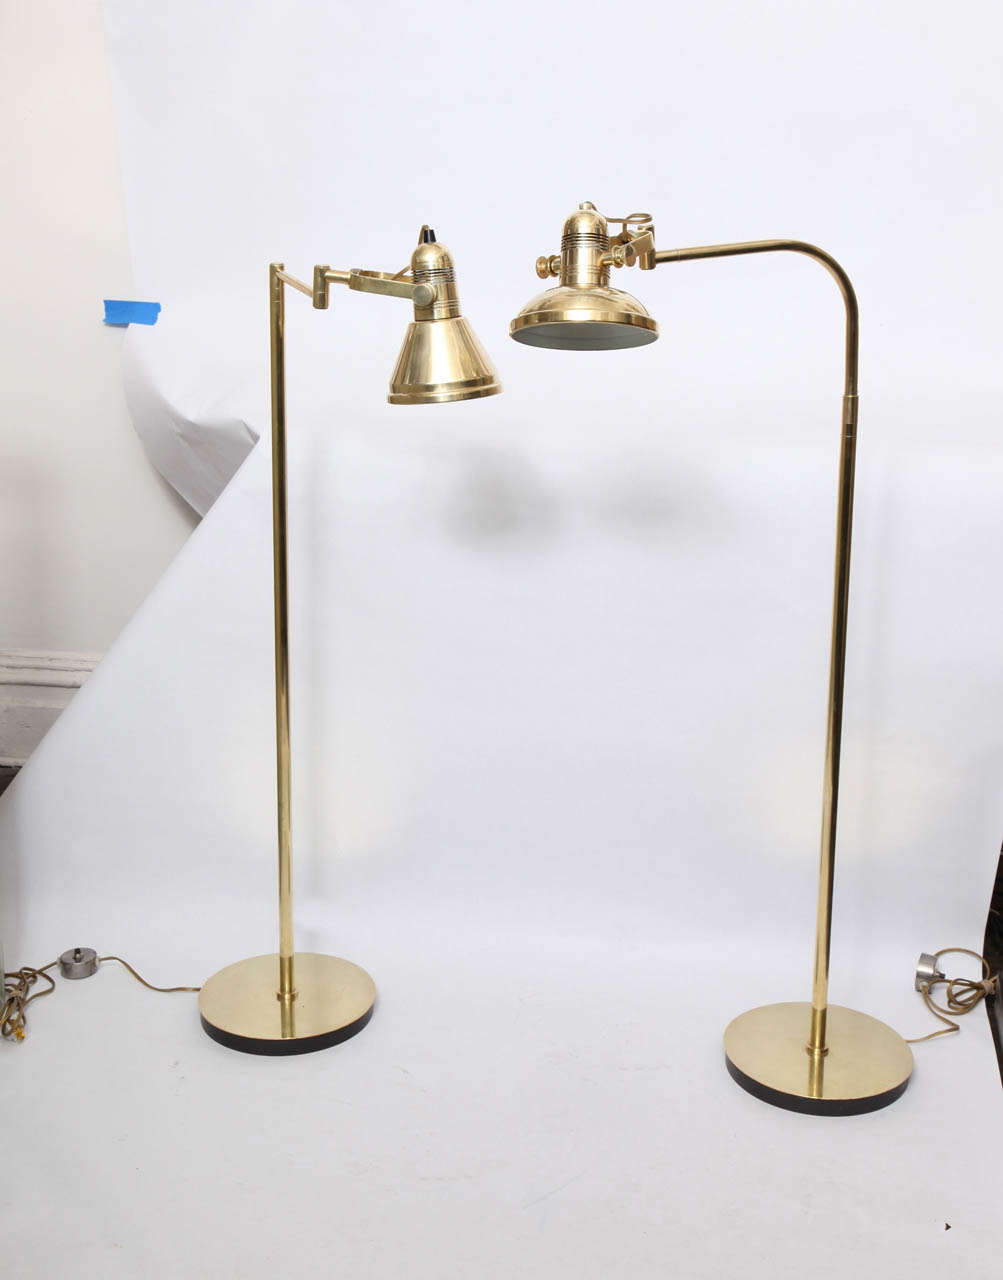 A pair of 1970s articulated brass floor reading lamps by Nessen Studio.